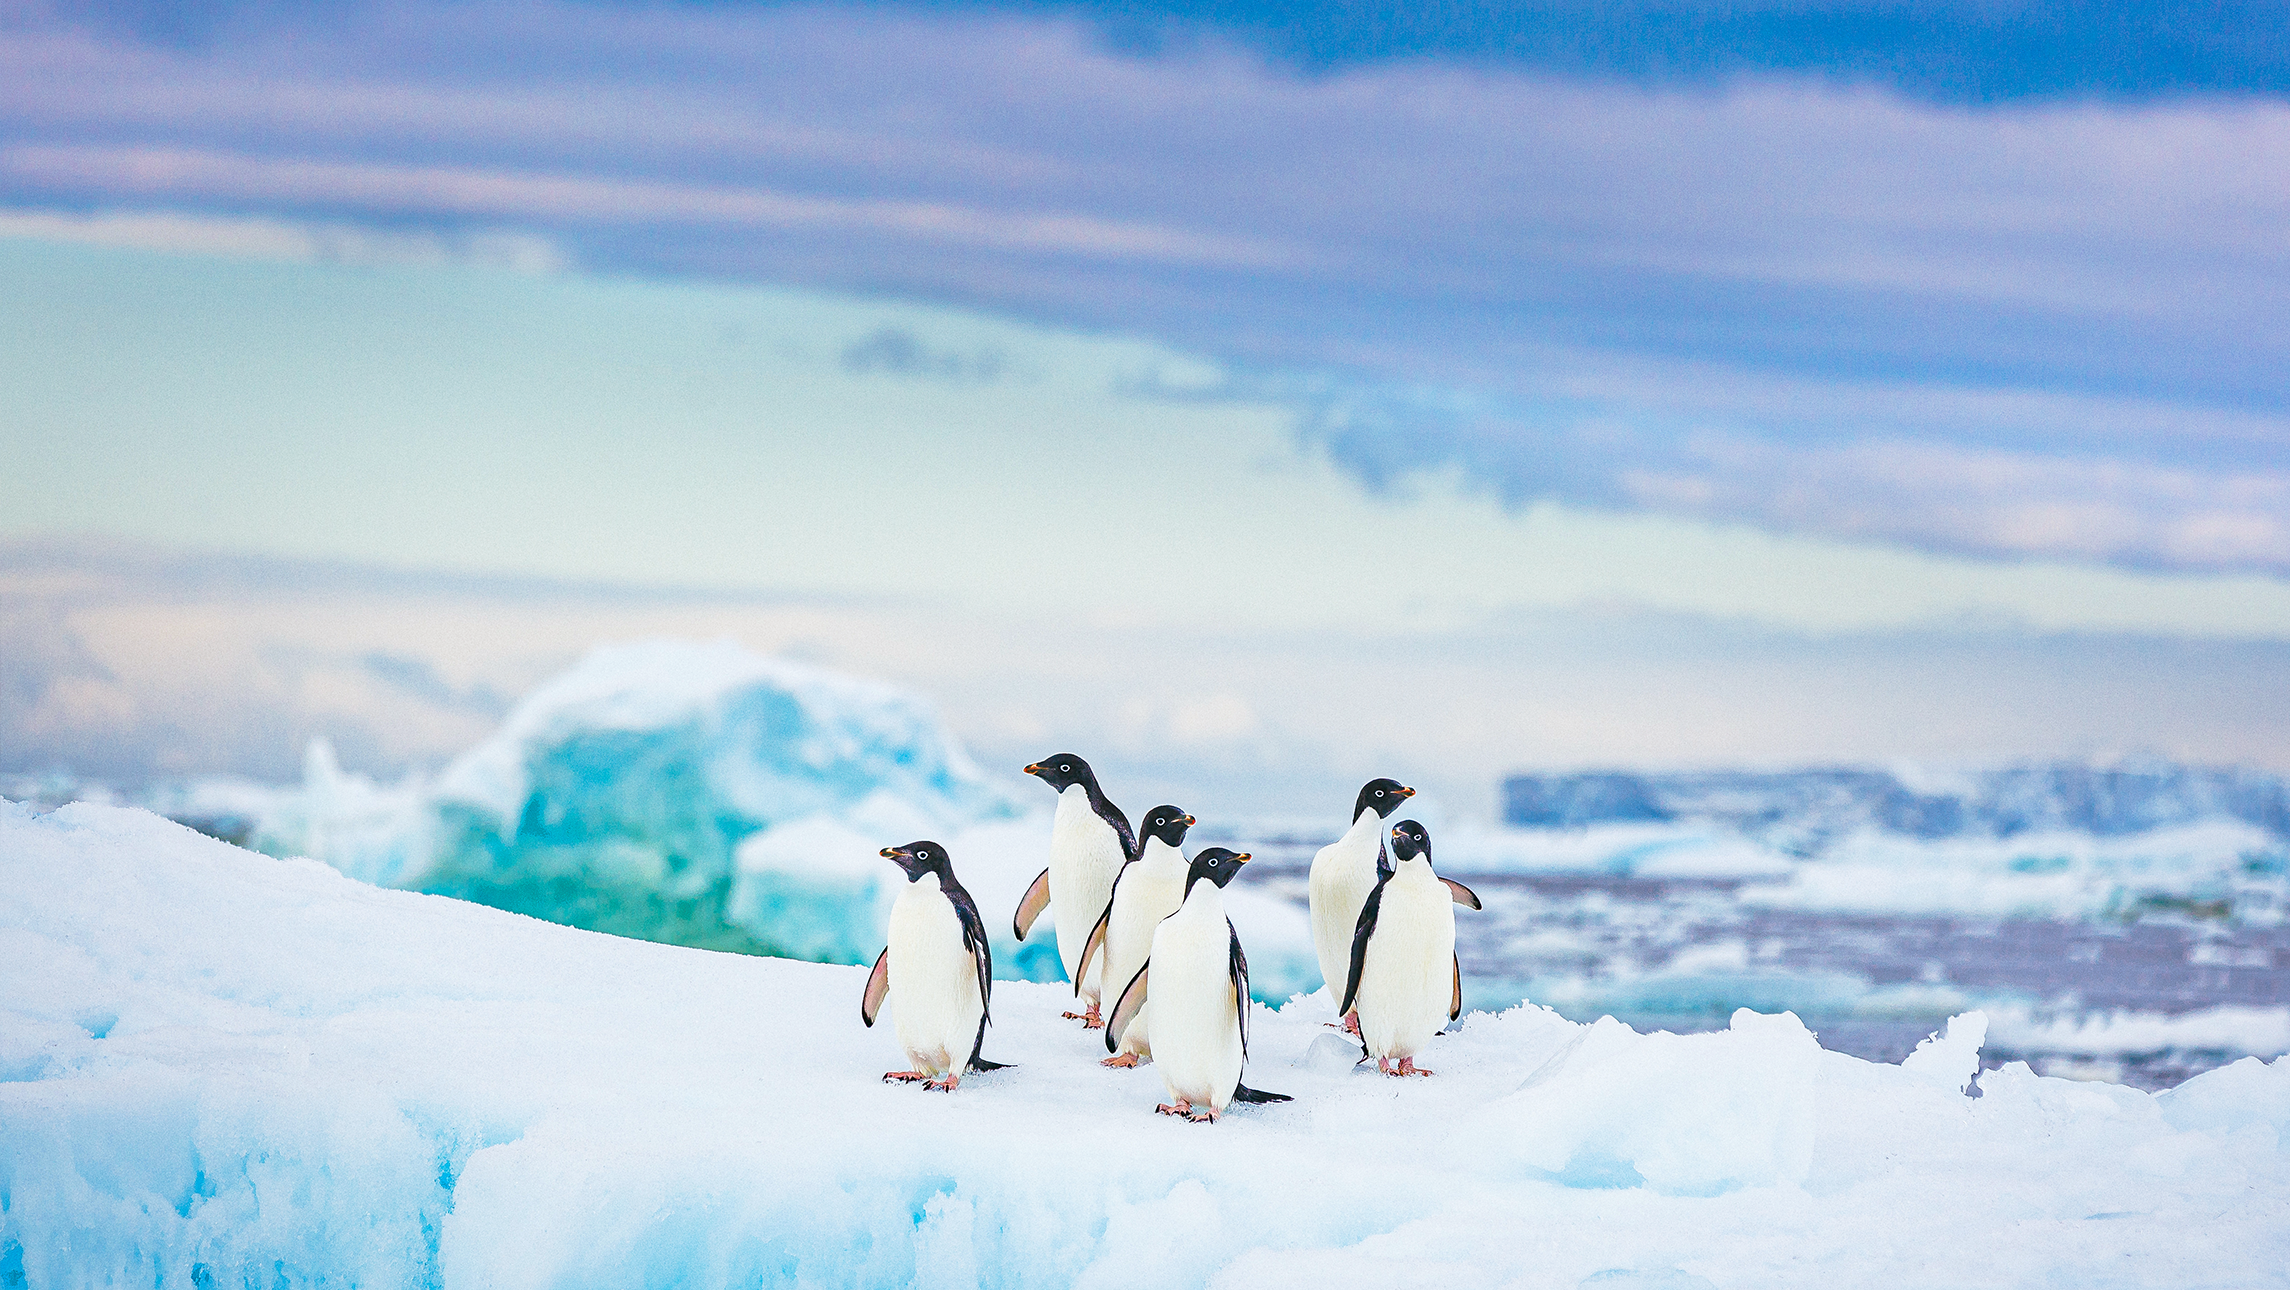 Adelie penguins sitting on the ice in Antarctica